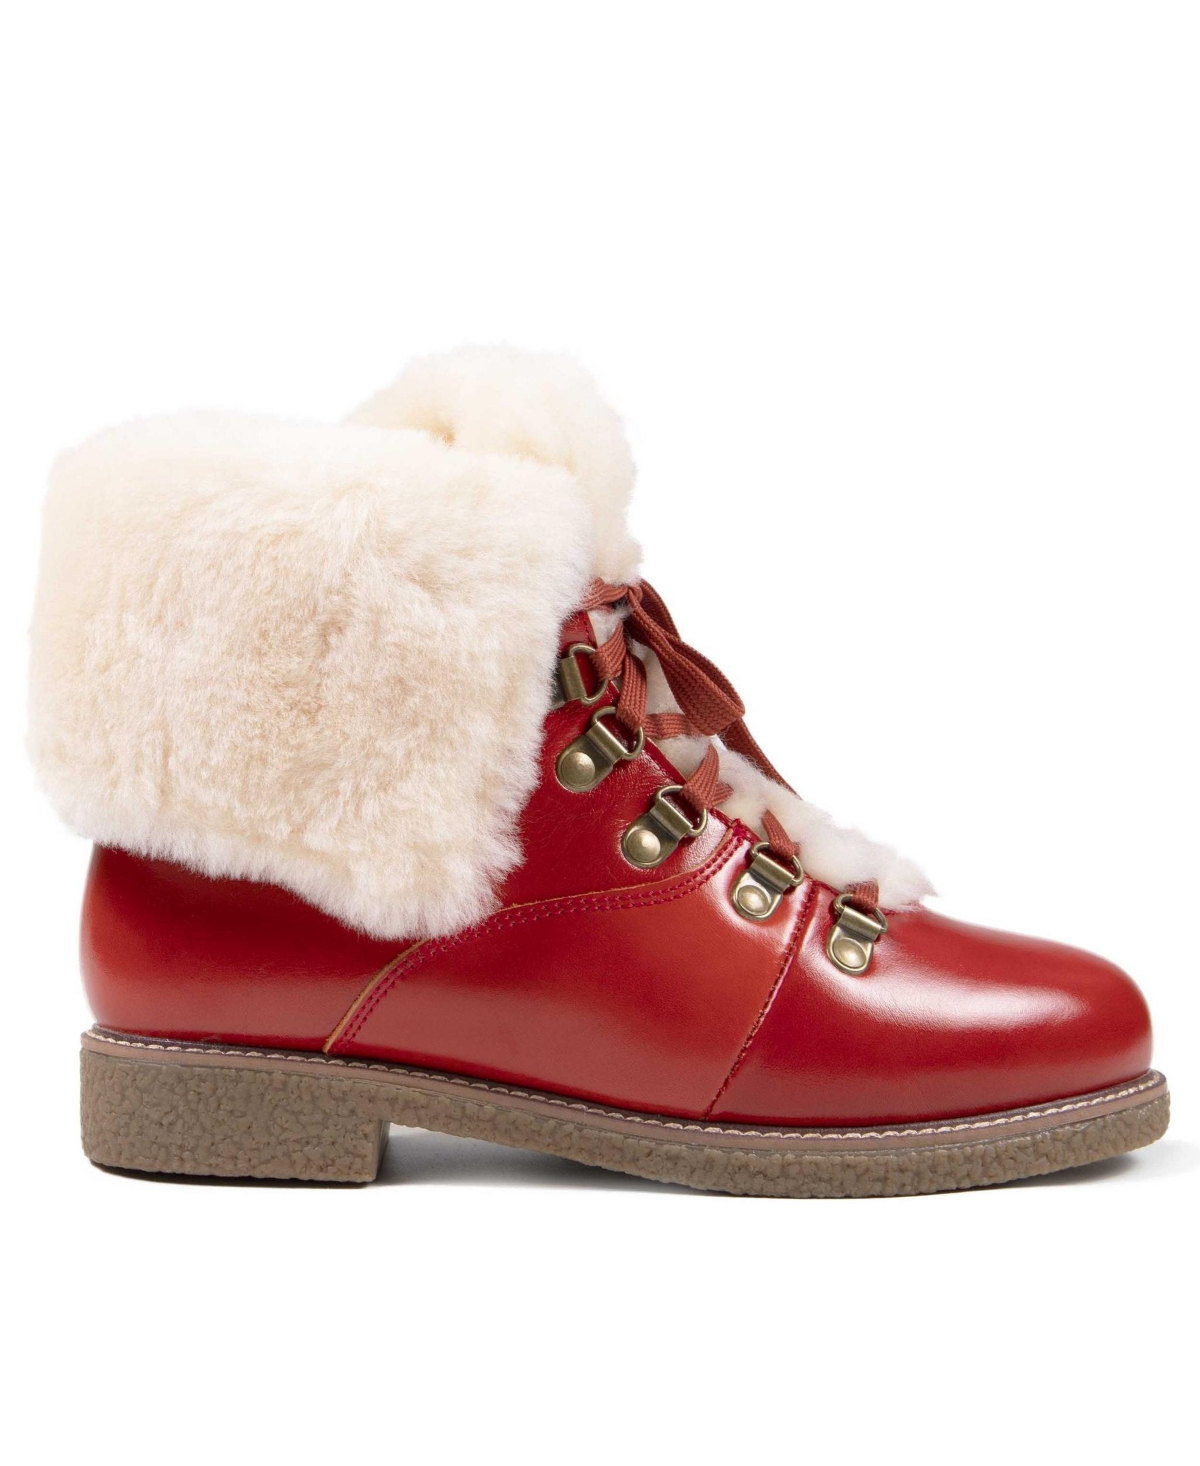 Ladies Autumn Comfy Boots - Red